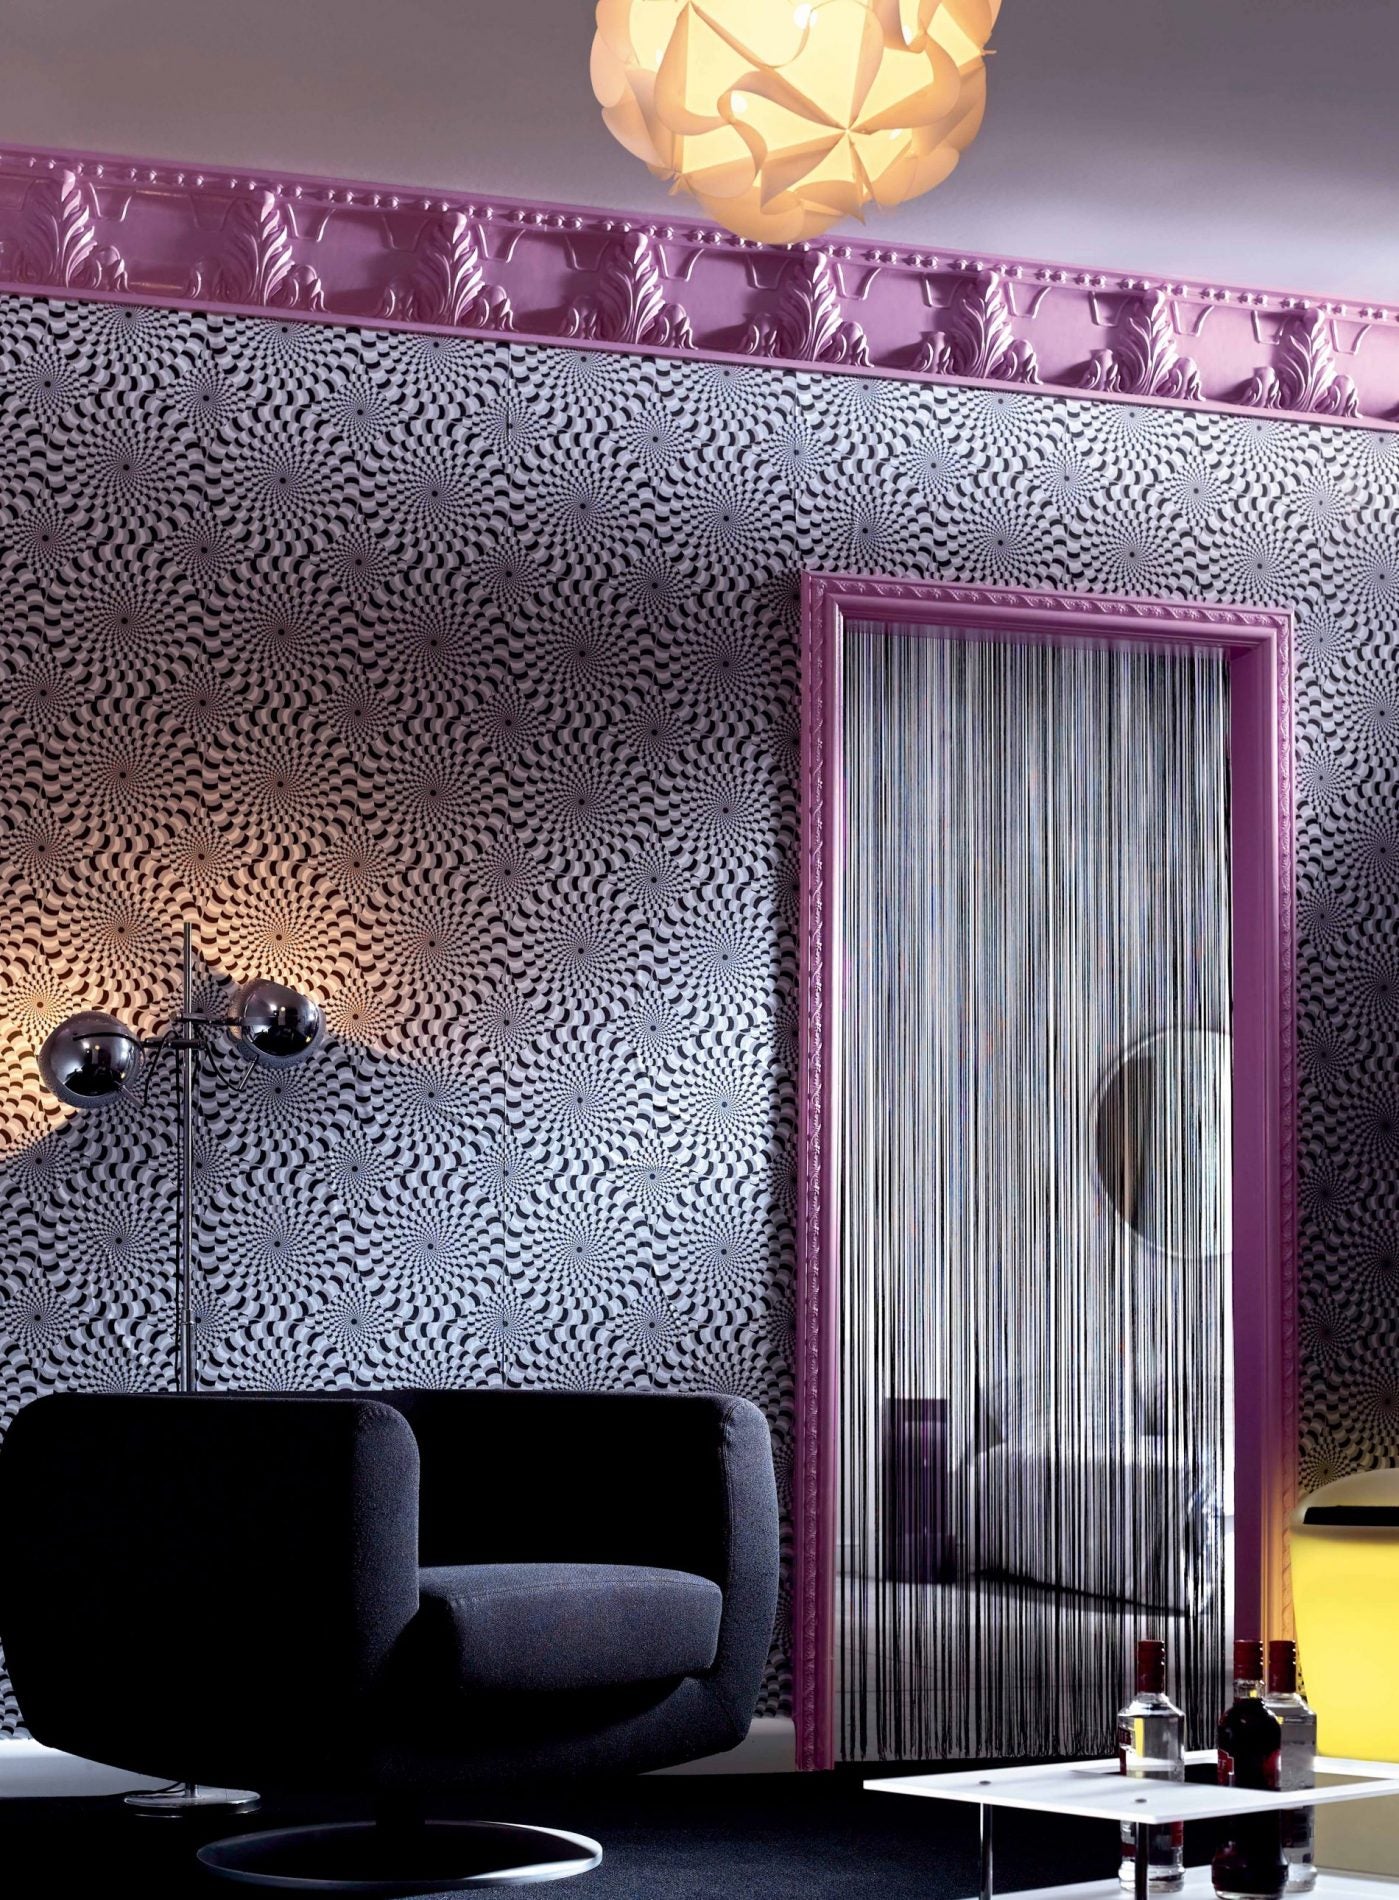 Z7 ARSTYL® 2M COVING - Covings | DecorMania